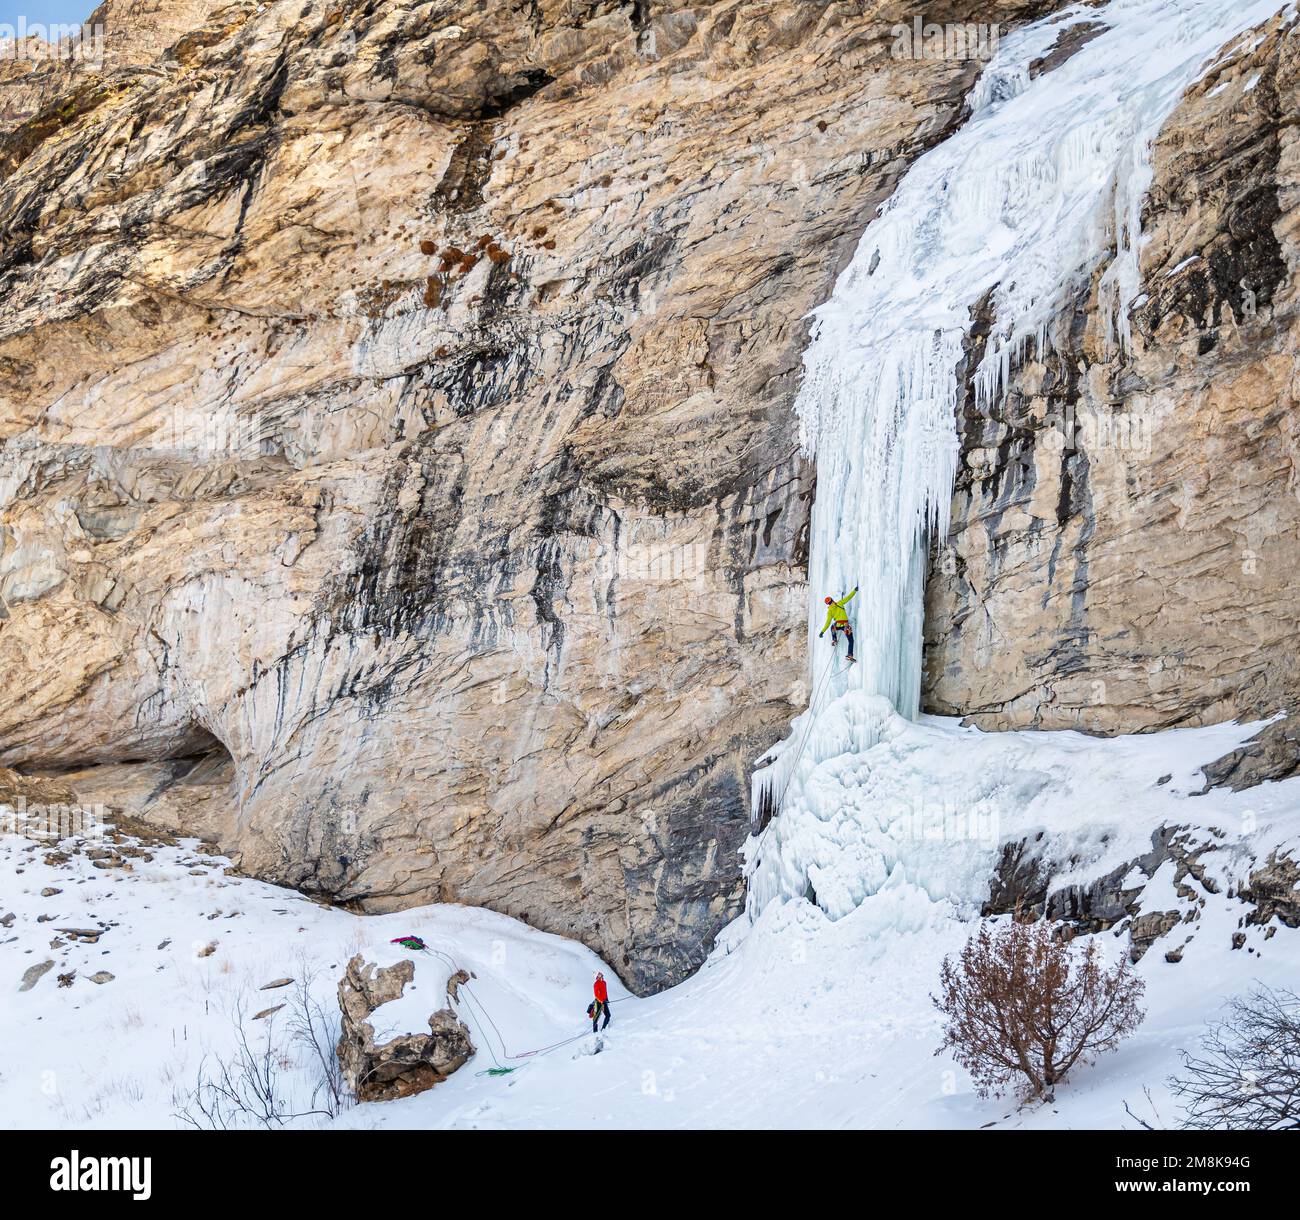 Elijah Weber climbs the Boy Scout ice climb rated WI 4-5 in The Ruby Mountains Stock Photo